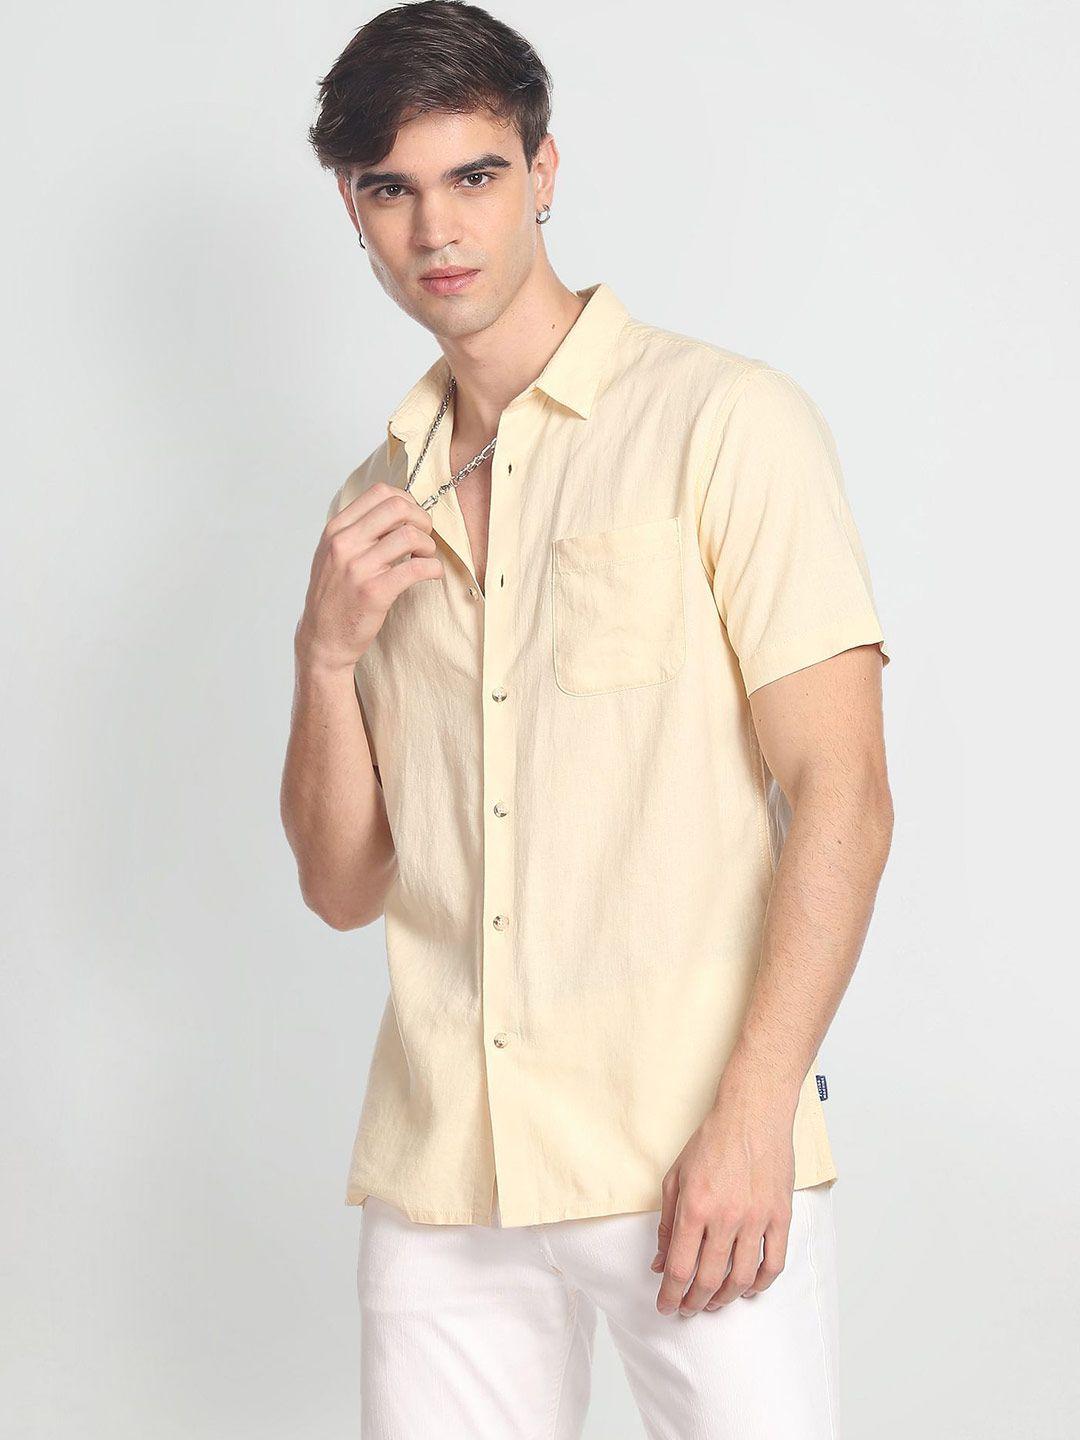 flying-machine-spread-collar-solid-slim-fit-casual-shirt